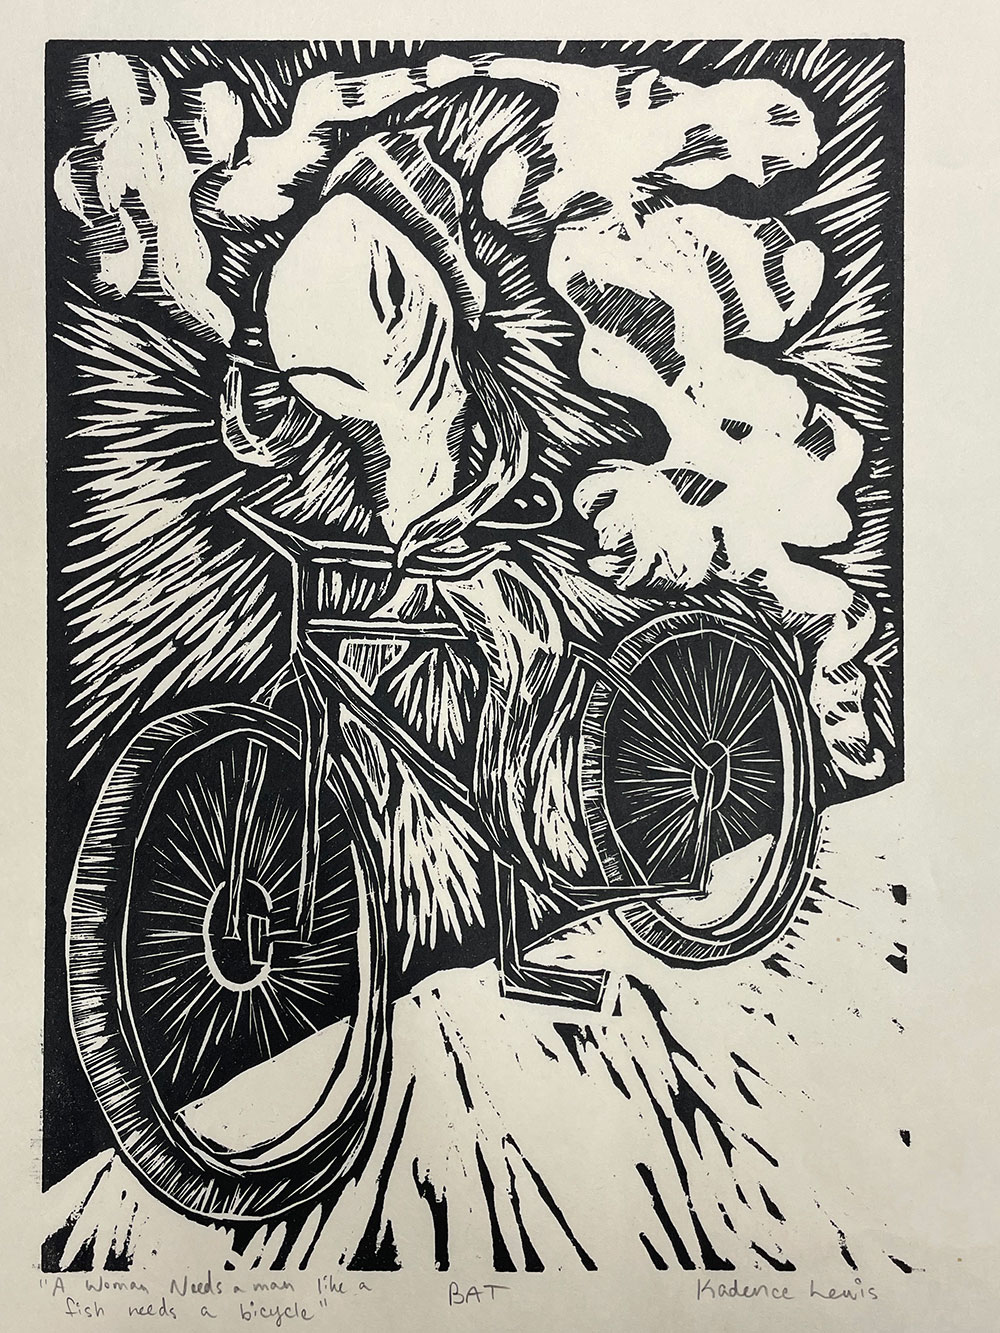 A printed image of a coy fish riding a bicycle, with a unique pattern of shapes in the background. 